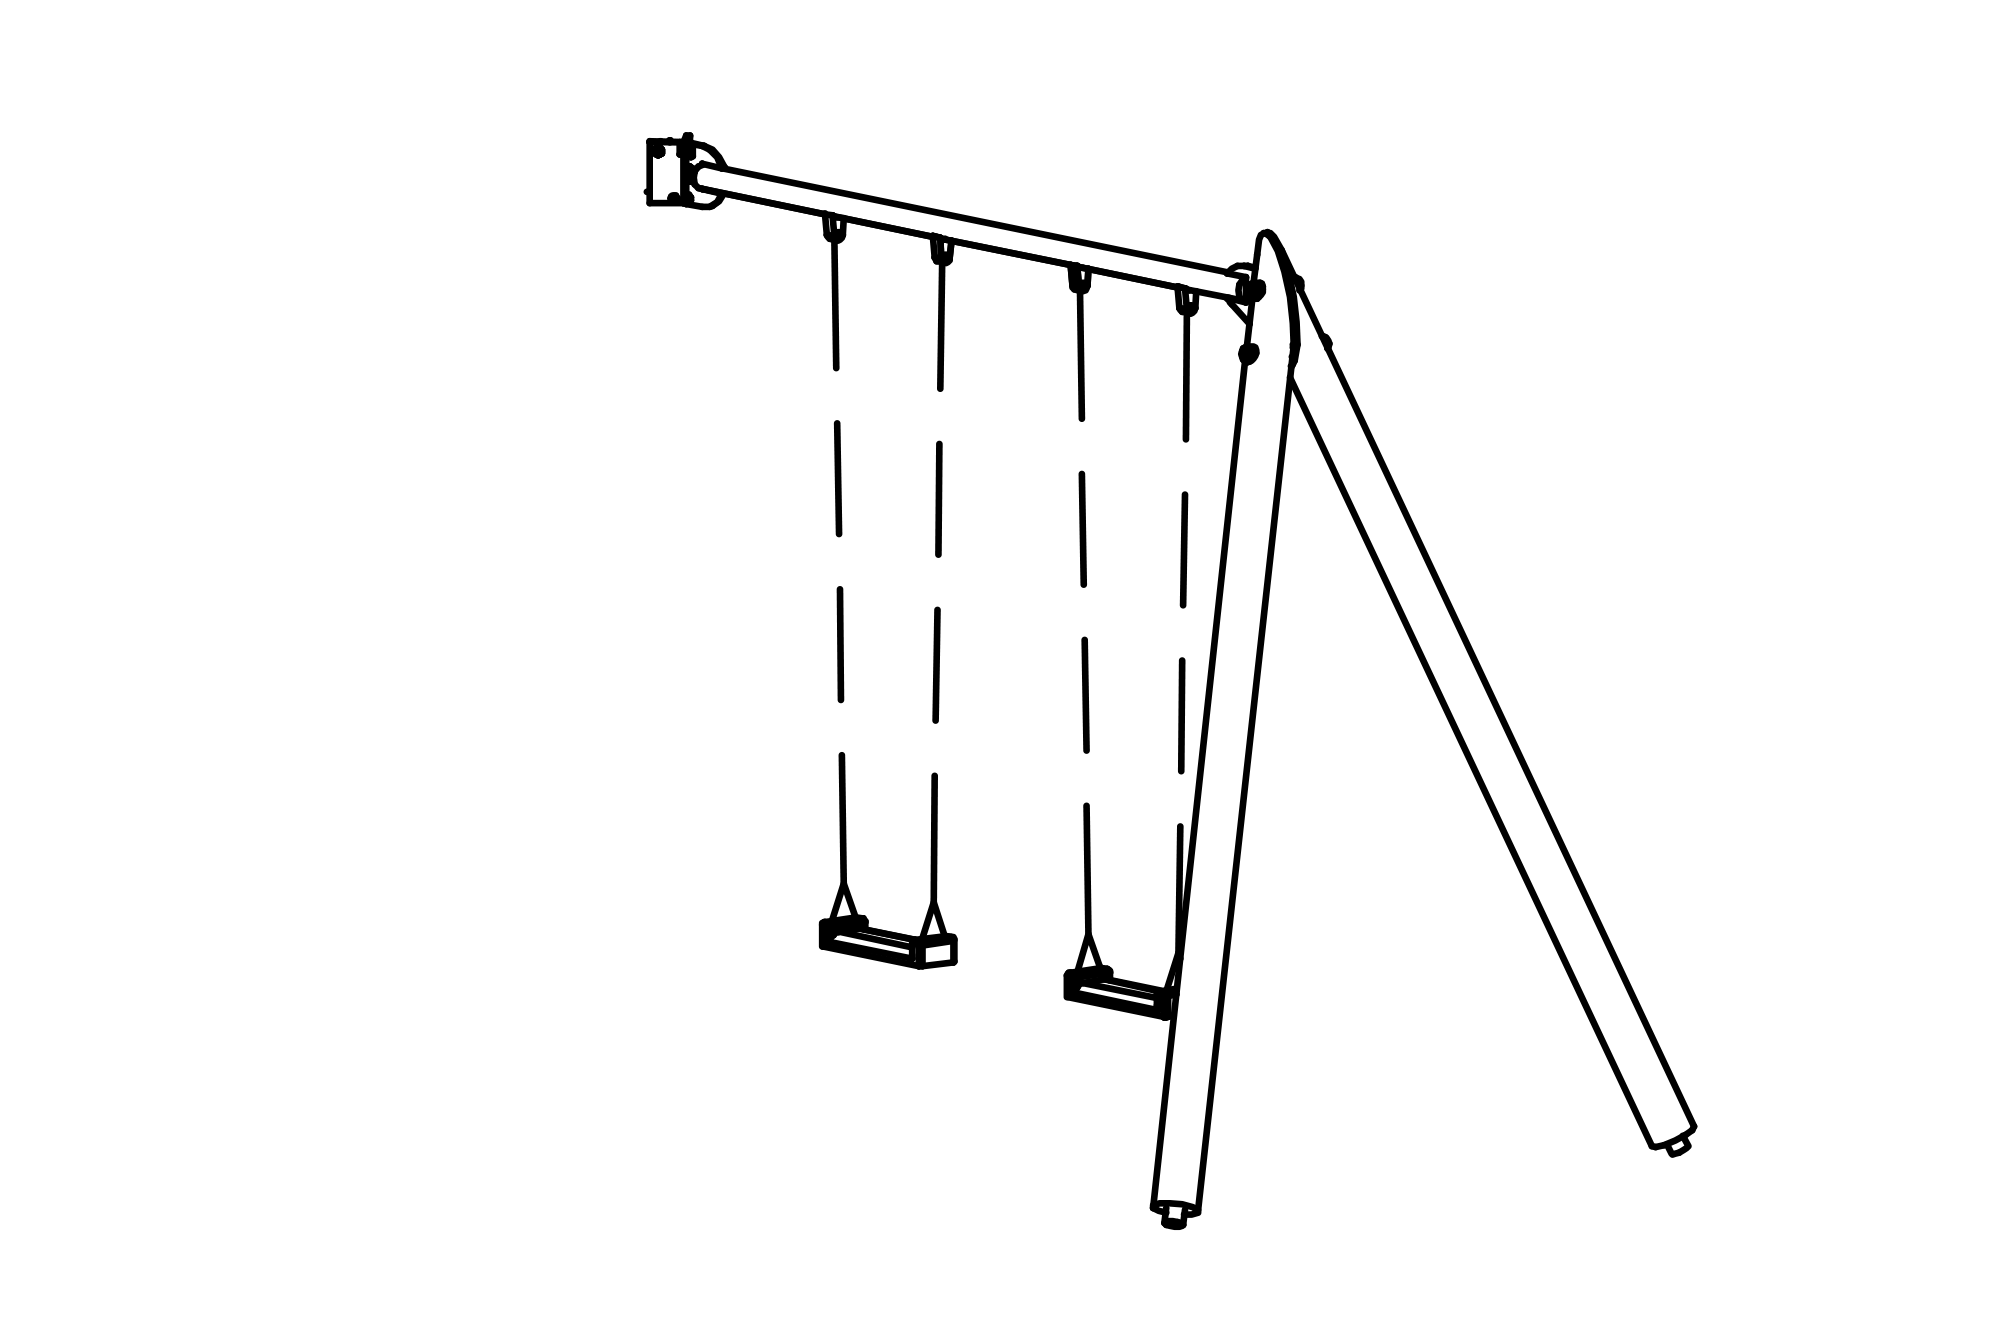 Double Swing special, height = 3 m for attachment to corner on Square Tower with roof.